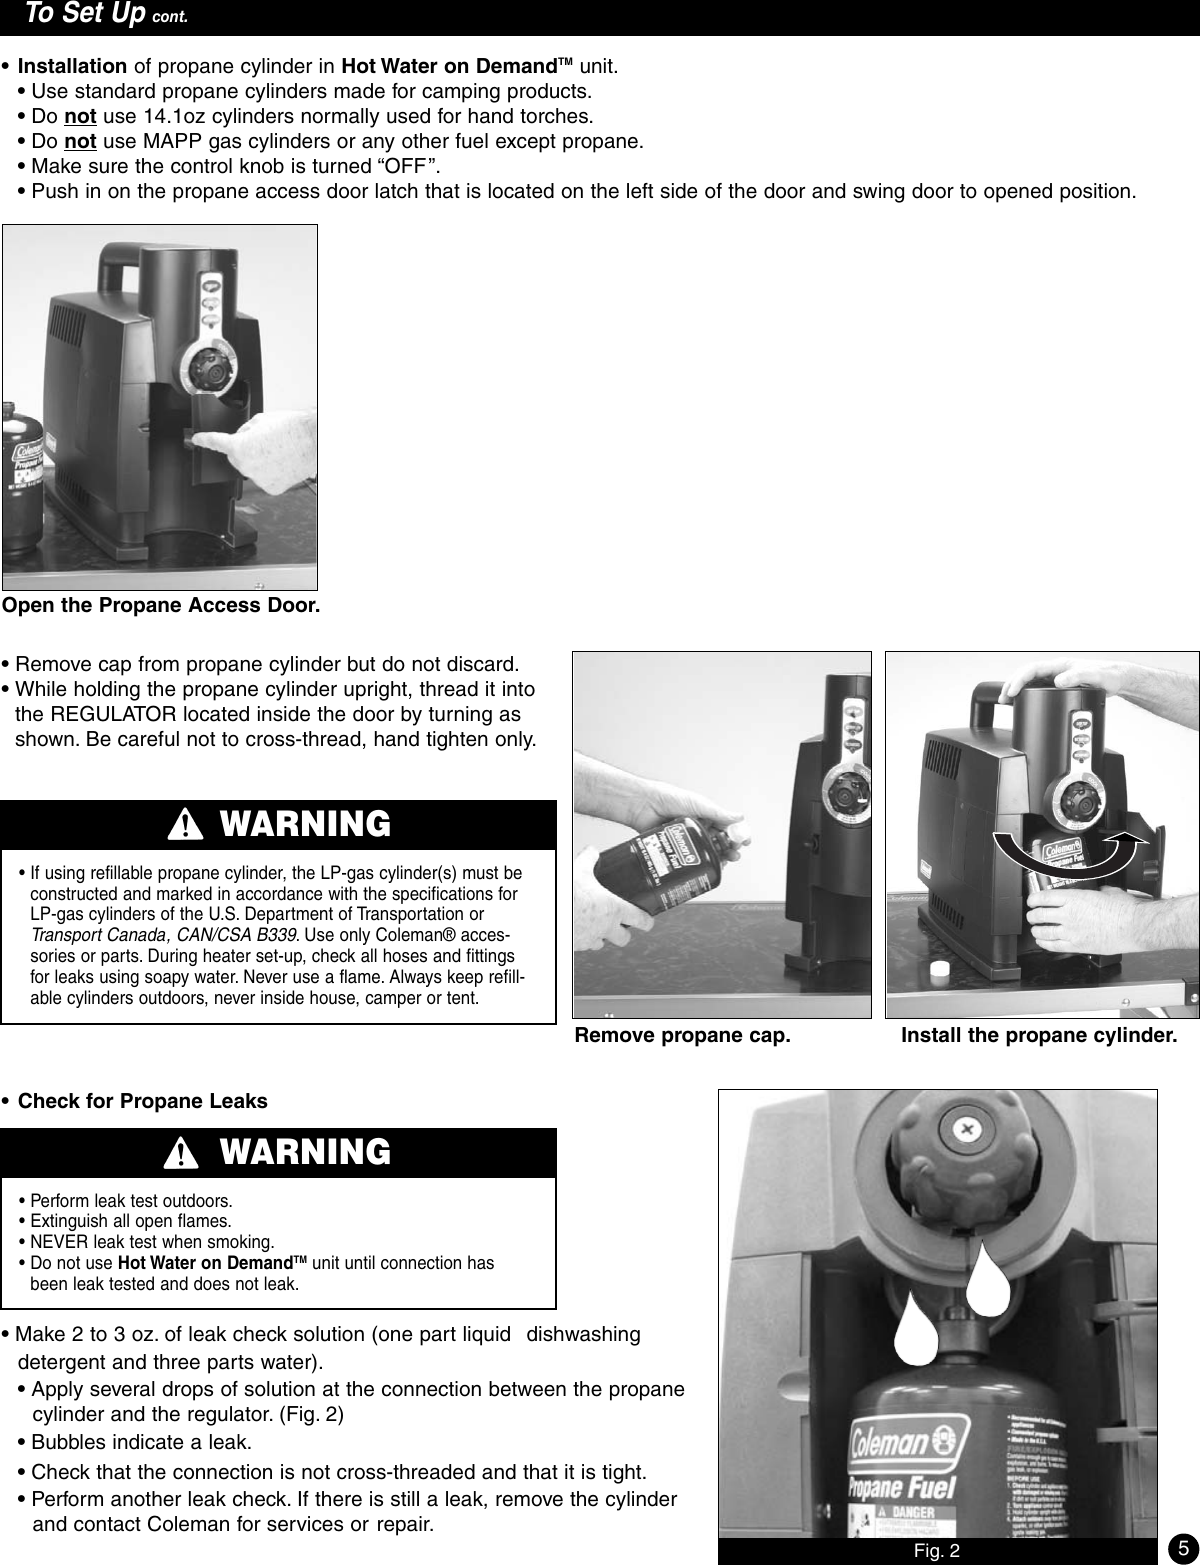 Page 5 of 12 - Coleman Coleman-2300-Series-Users-Manual- 2300B050 - Hot Water On Demand  Coleman-2300-series-users-manual